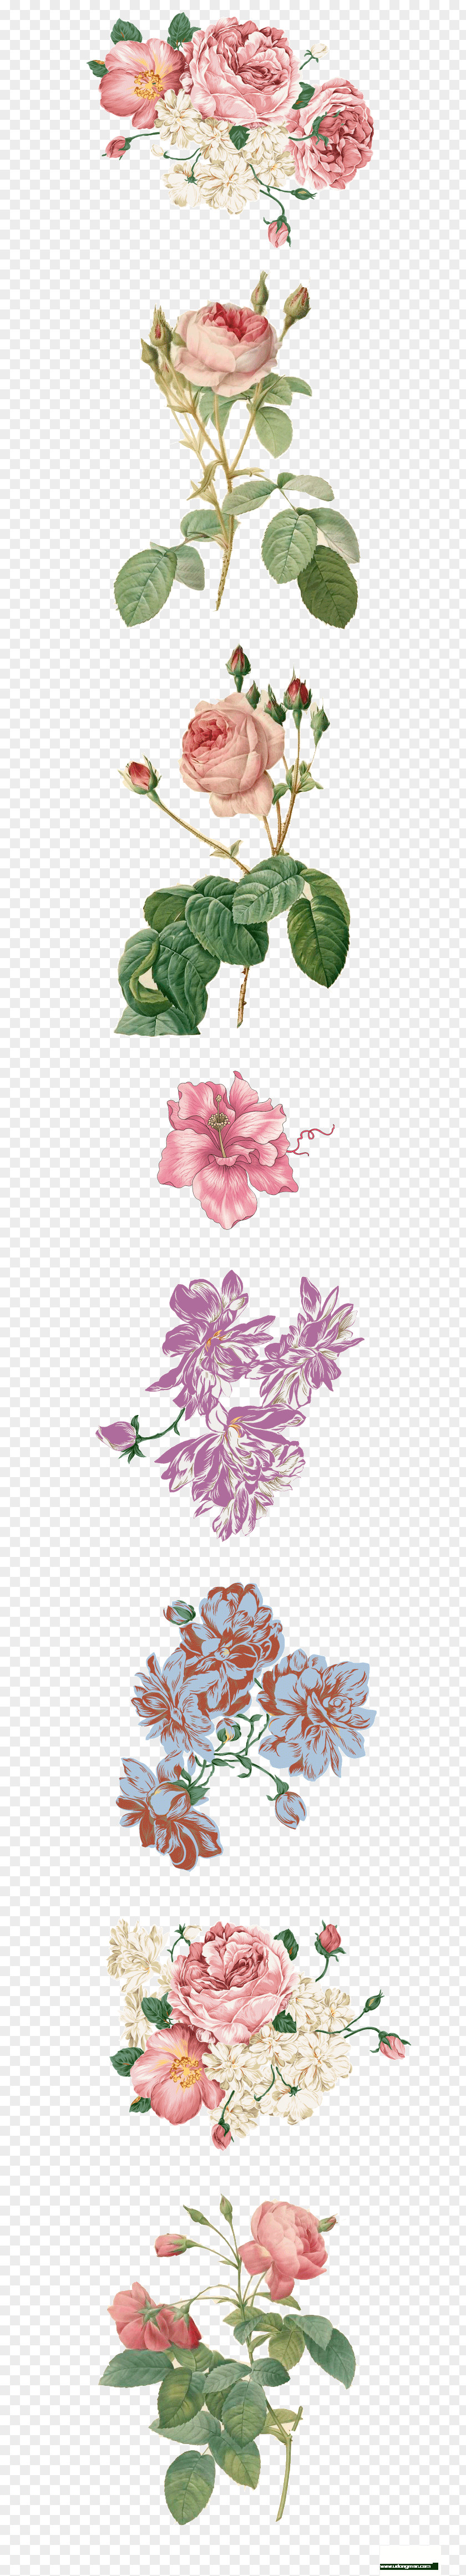 Bor Moutan Peony Design Painting Wall Flower PNG